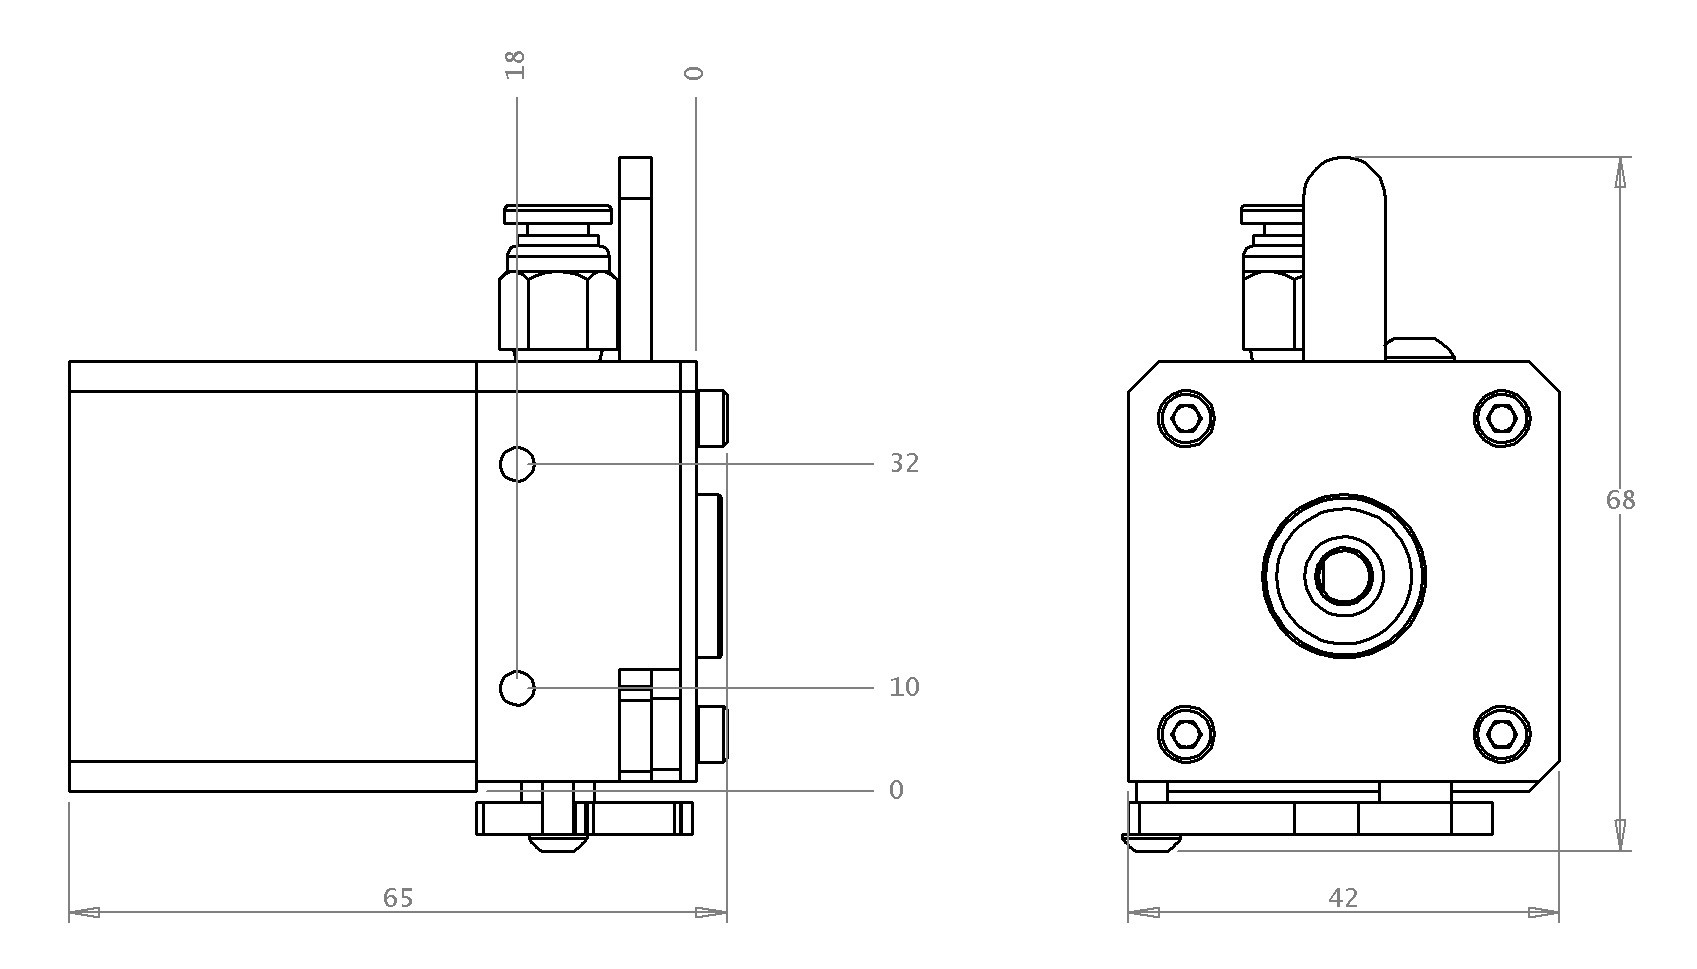 Dyzextruder drawings